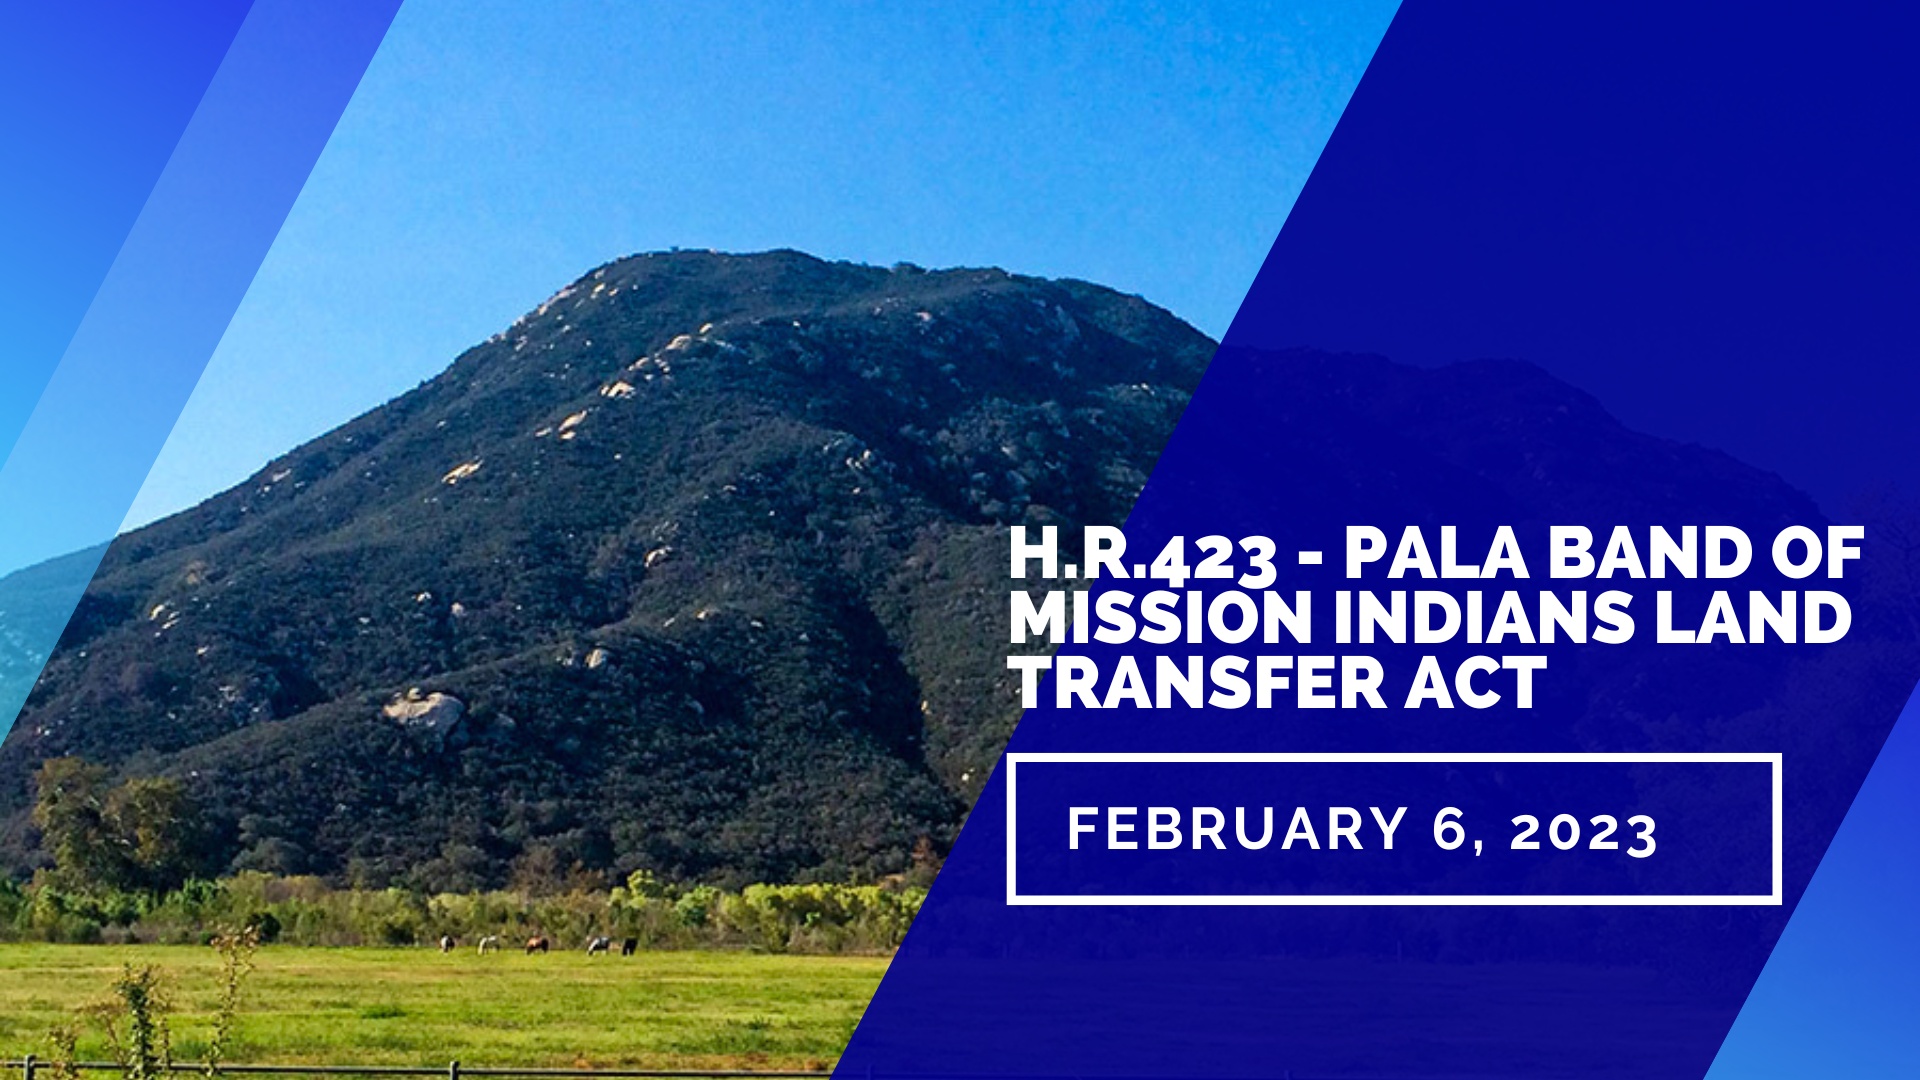 H.R.423 - Pala Band of Mission Indians Land Transfer Act